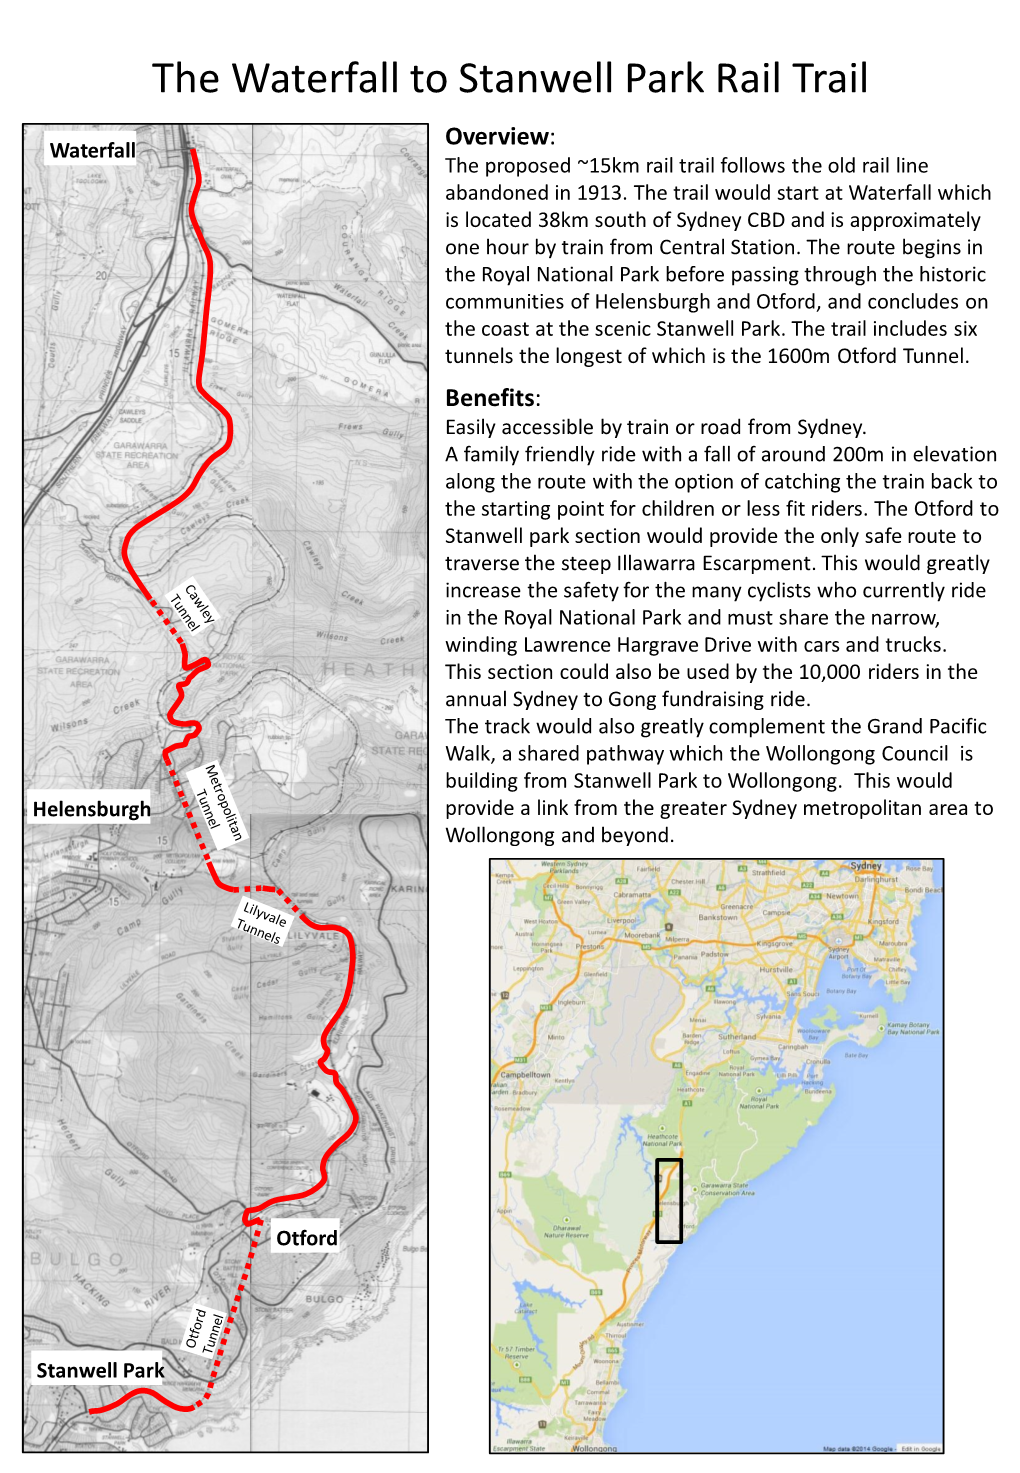 The Waterfall to Stanwell Park Rail Trail Overview: Waterfall the Proposed ~15Km Rail Trail Follows the Old Rail Line Abandoned in 1913